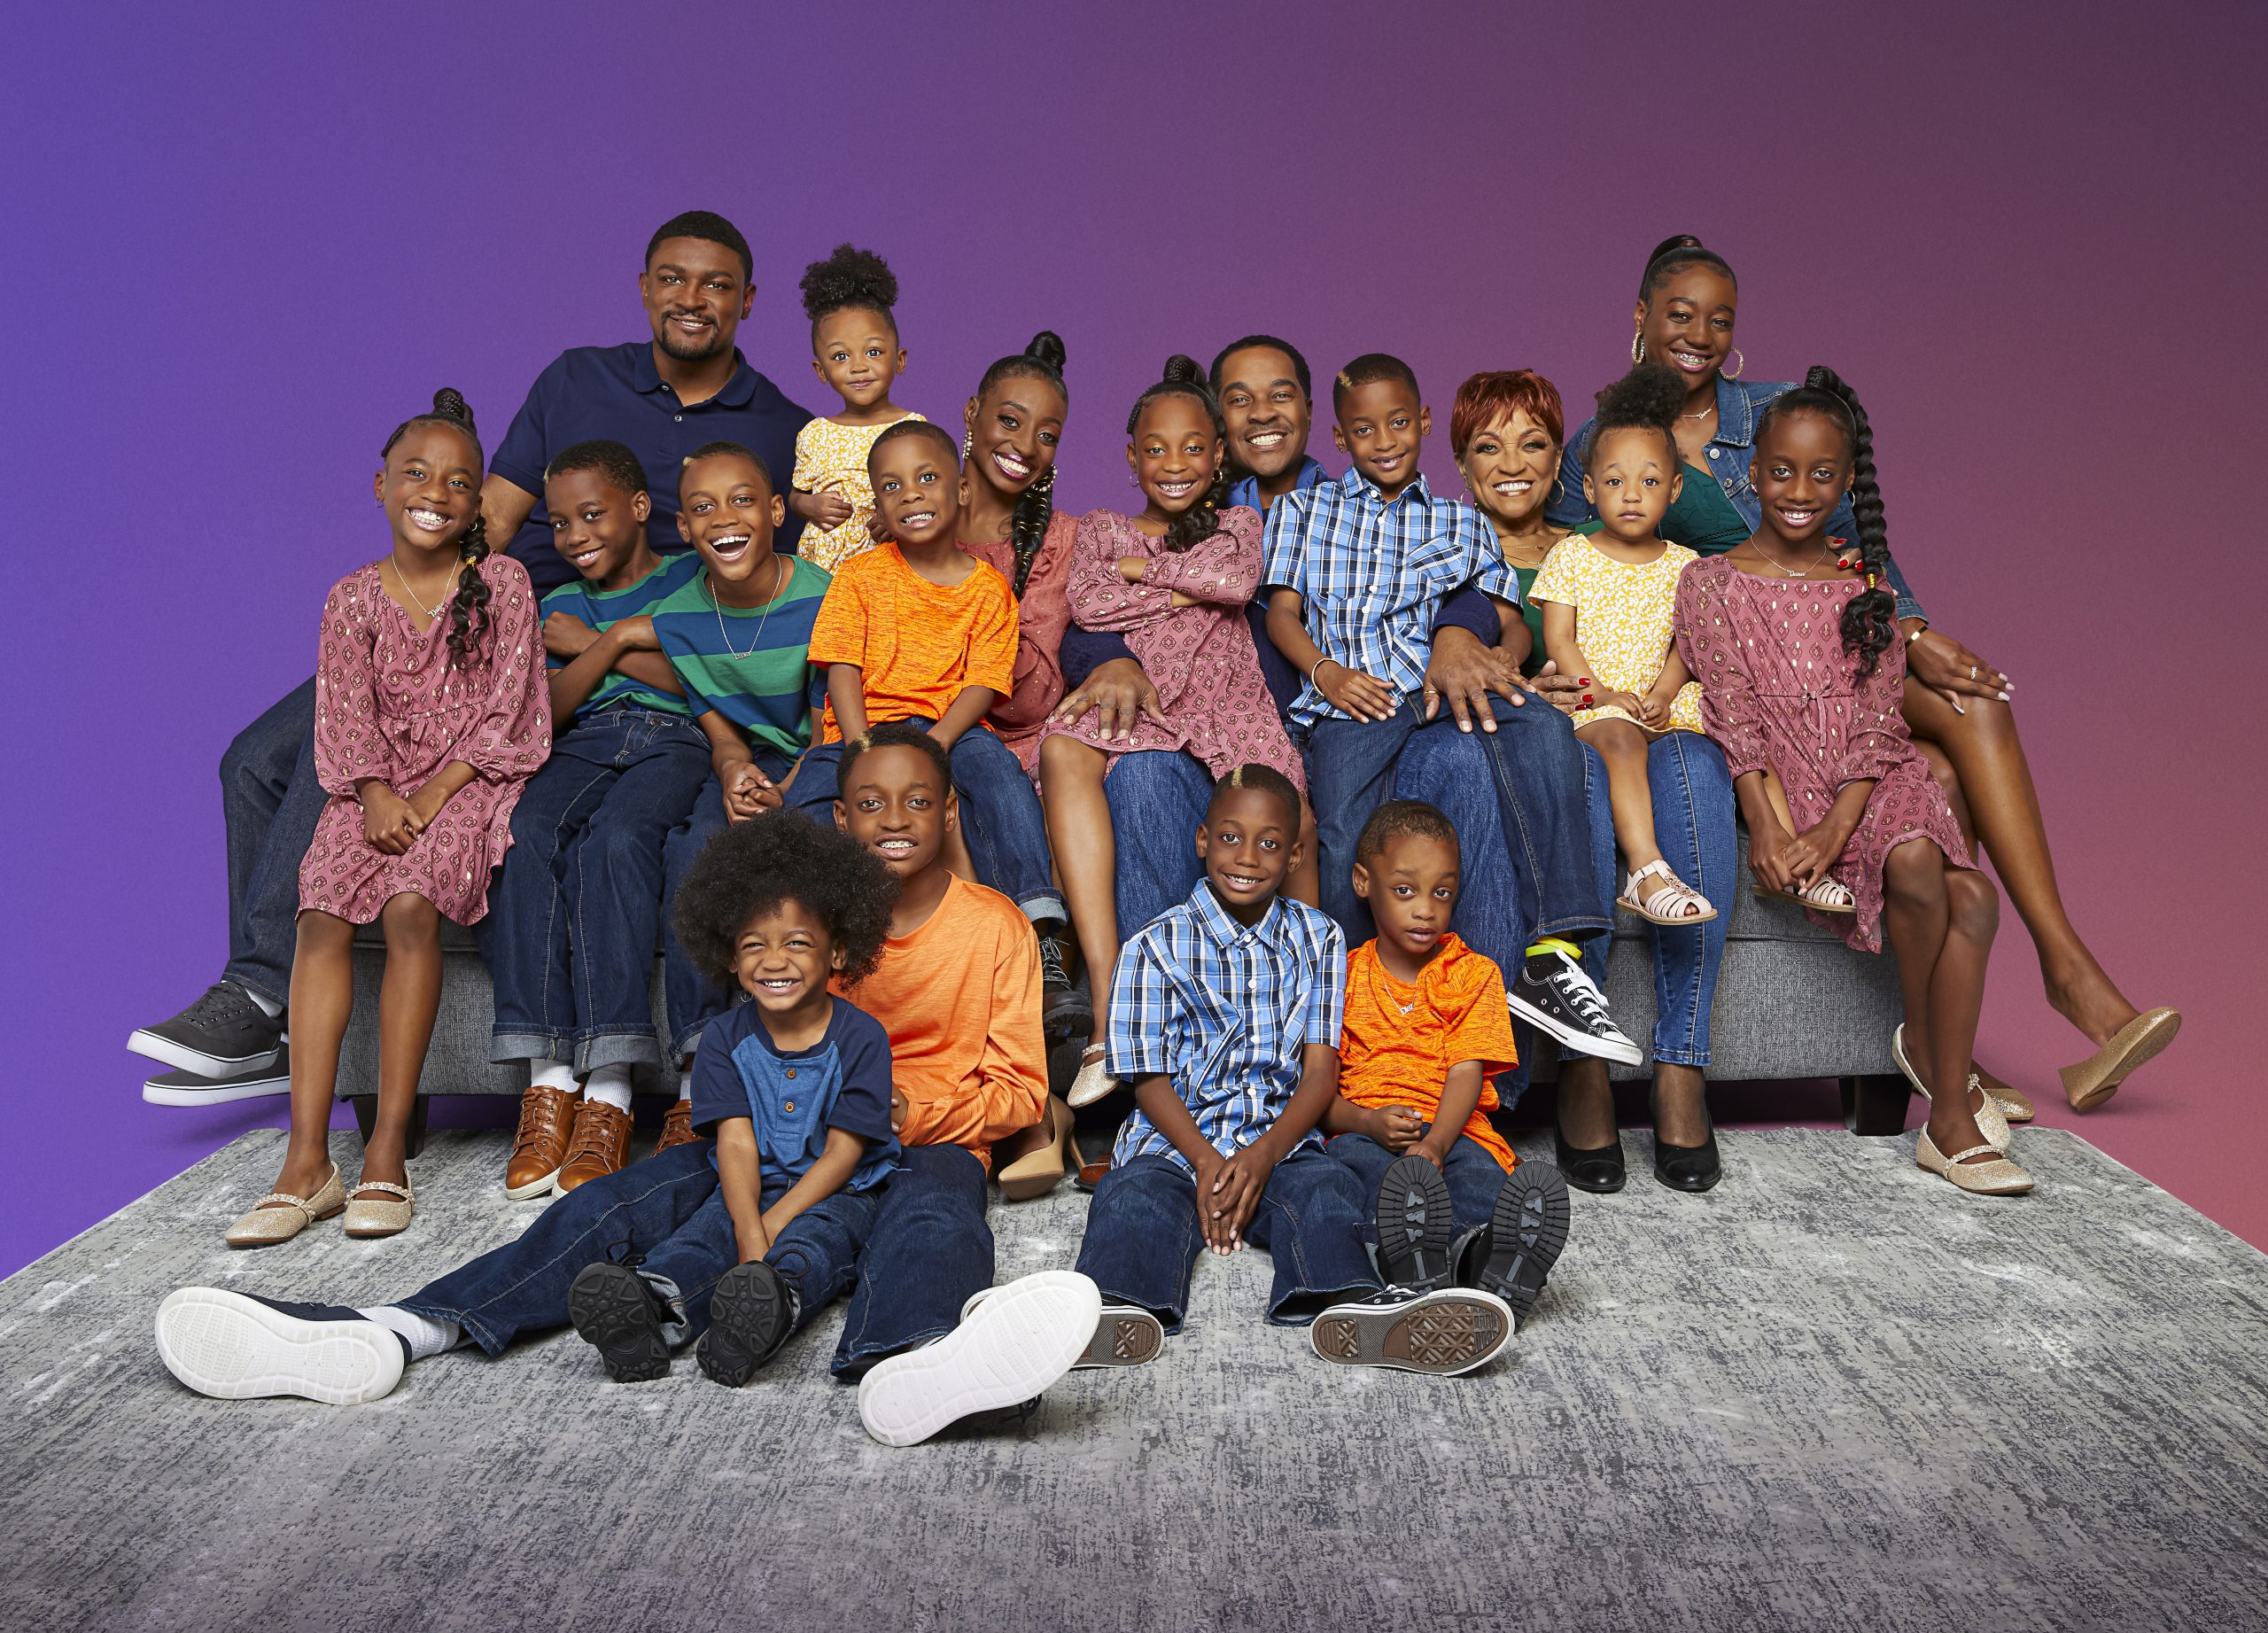 Feel Good Friday: My Interview With Deon & Karen From TLC’s ‘Doubling Down With The Derrico’s’